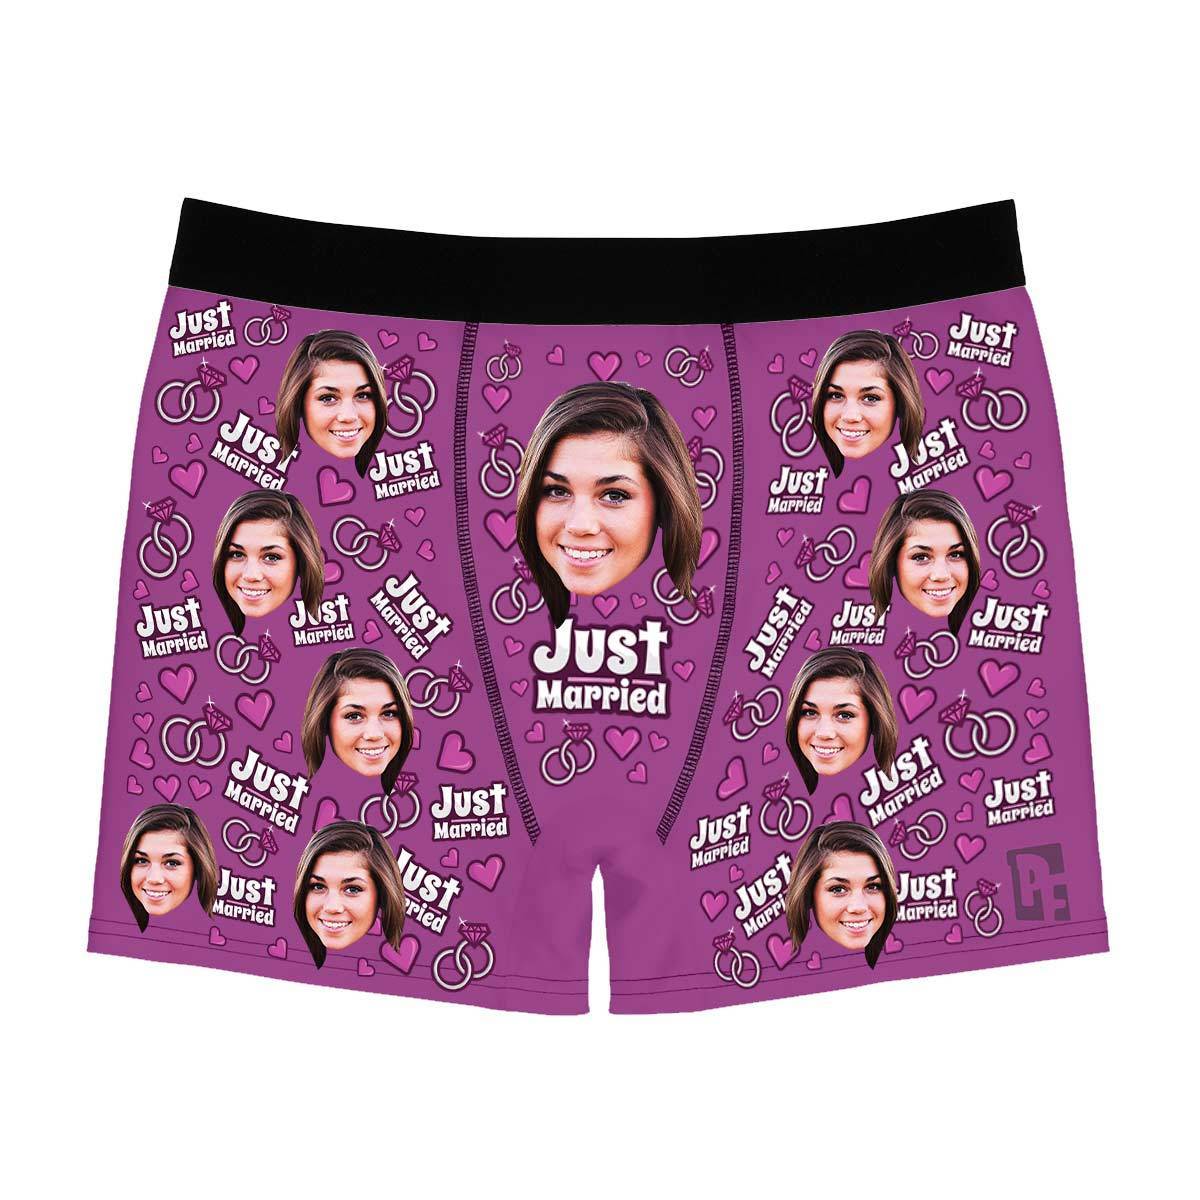 Purple Just married men's boxer briefs personalized with photo printed on them